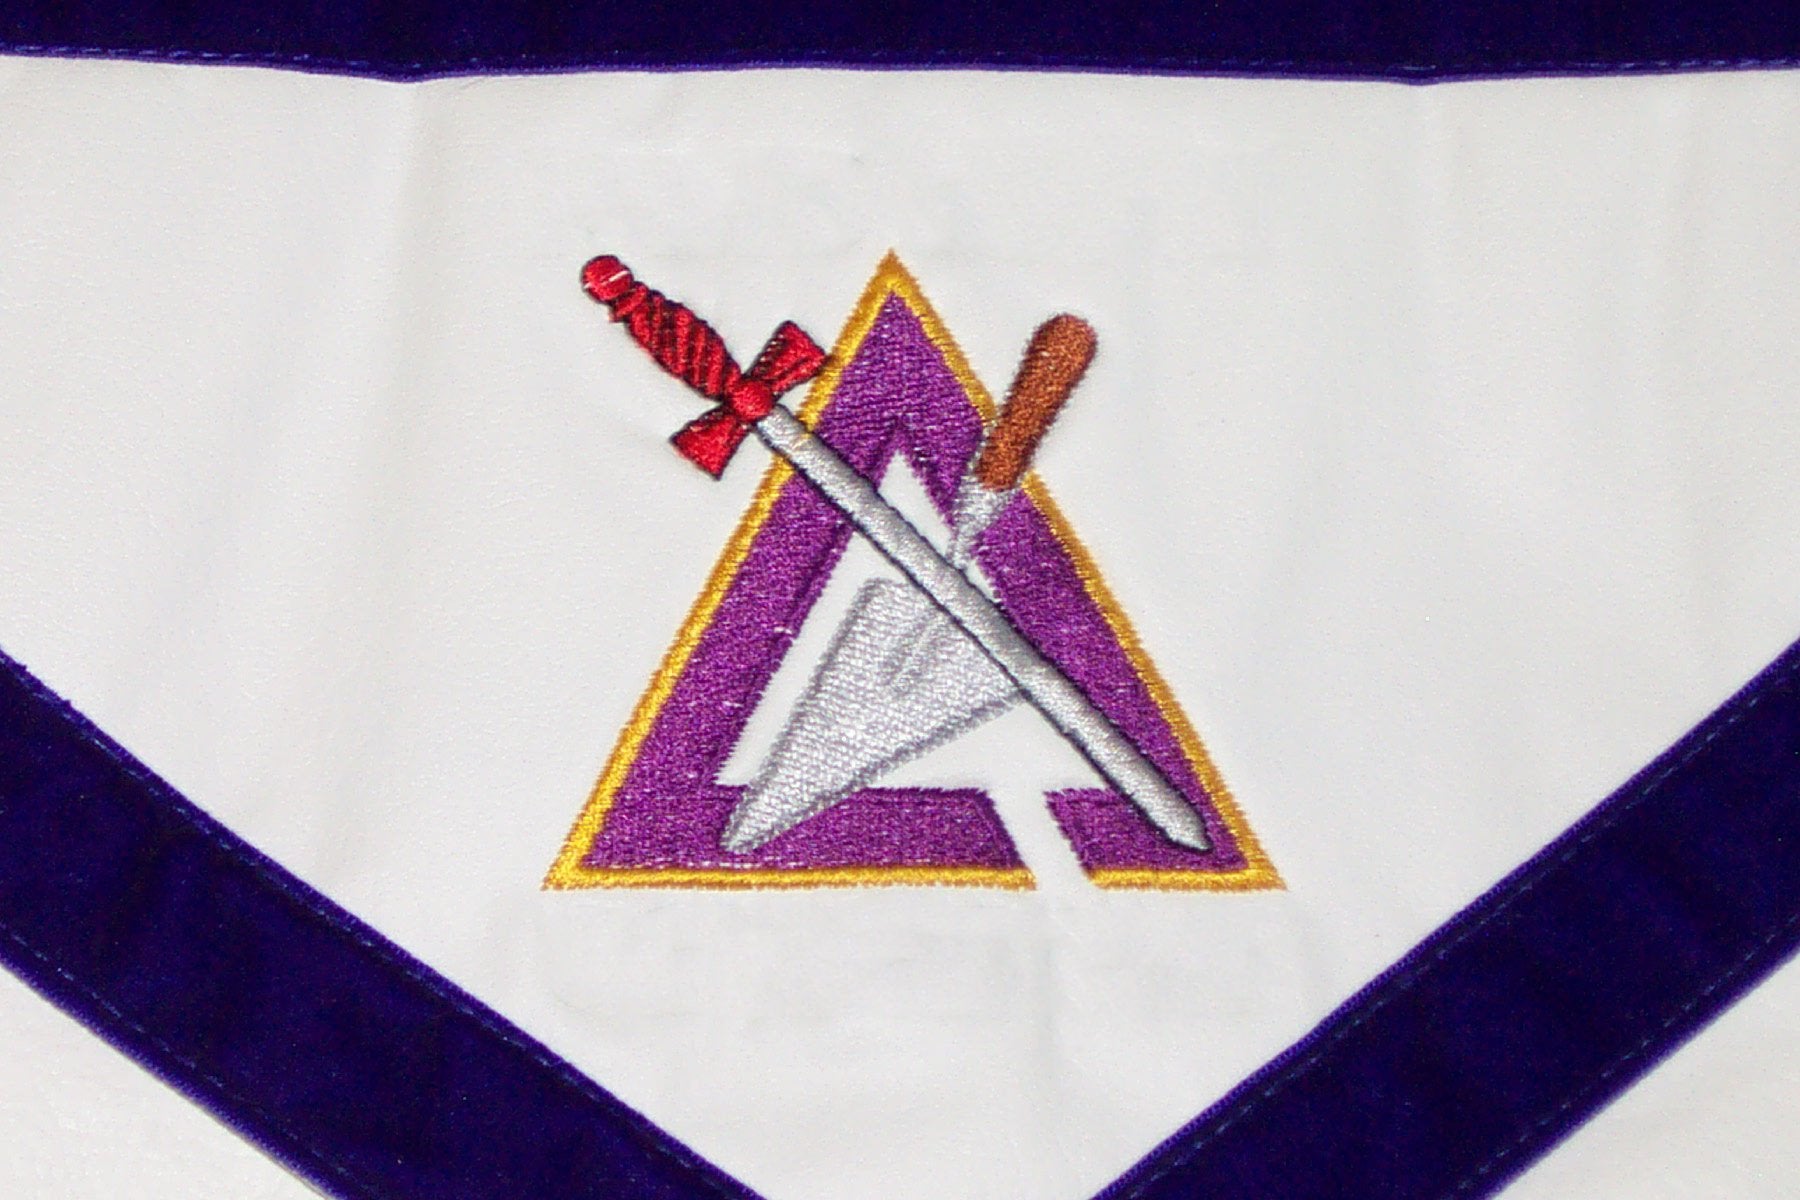 Royal Arch Chapter & Council Apron - Reversible Double-Sided - Bricks Masons